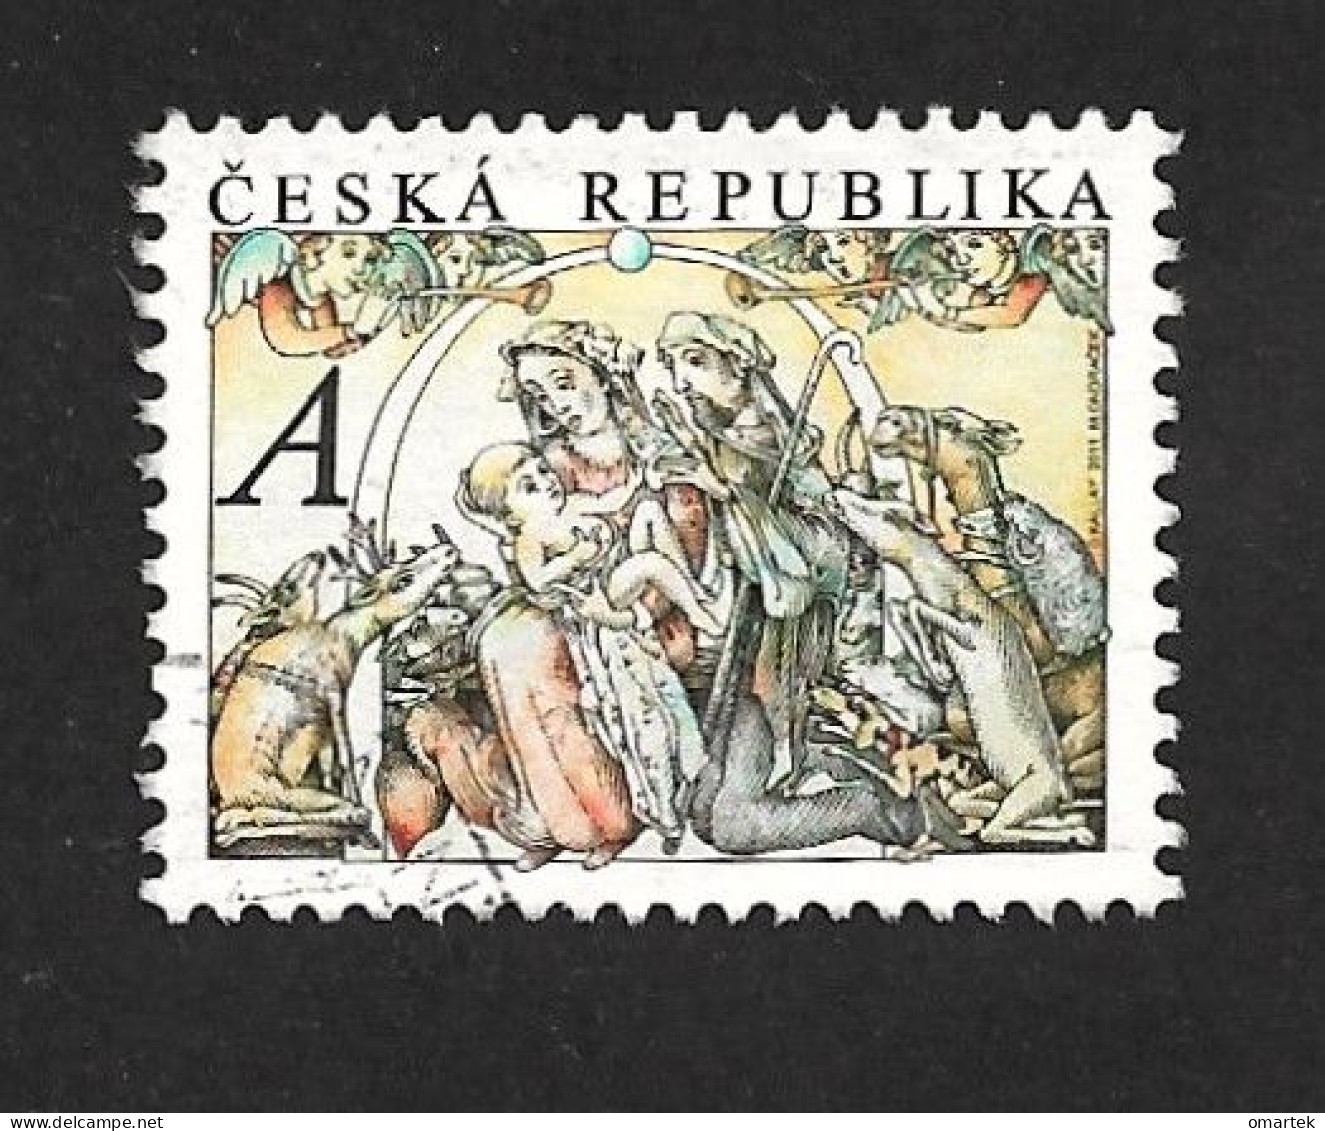 Czech Republic 2011 ⊙ Mi 706 Sc 3521 Christmas, Holy Family. Tschechische Republik C.4 - Used Stamps